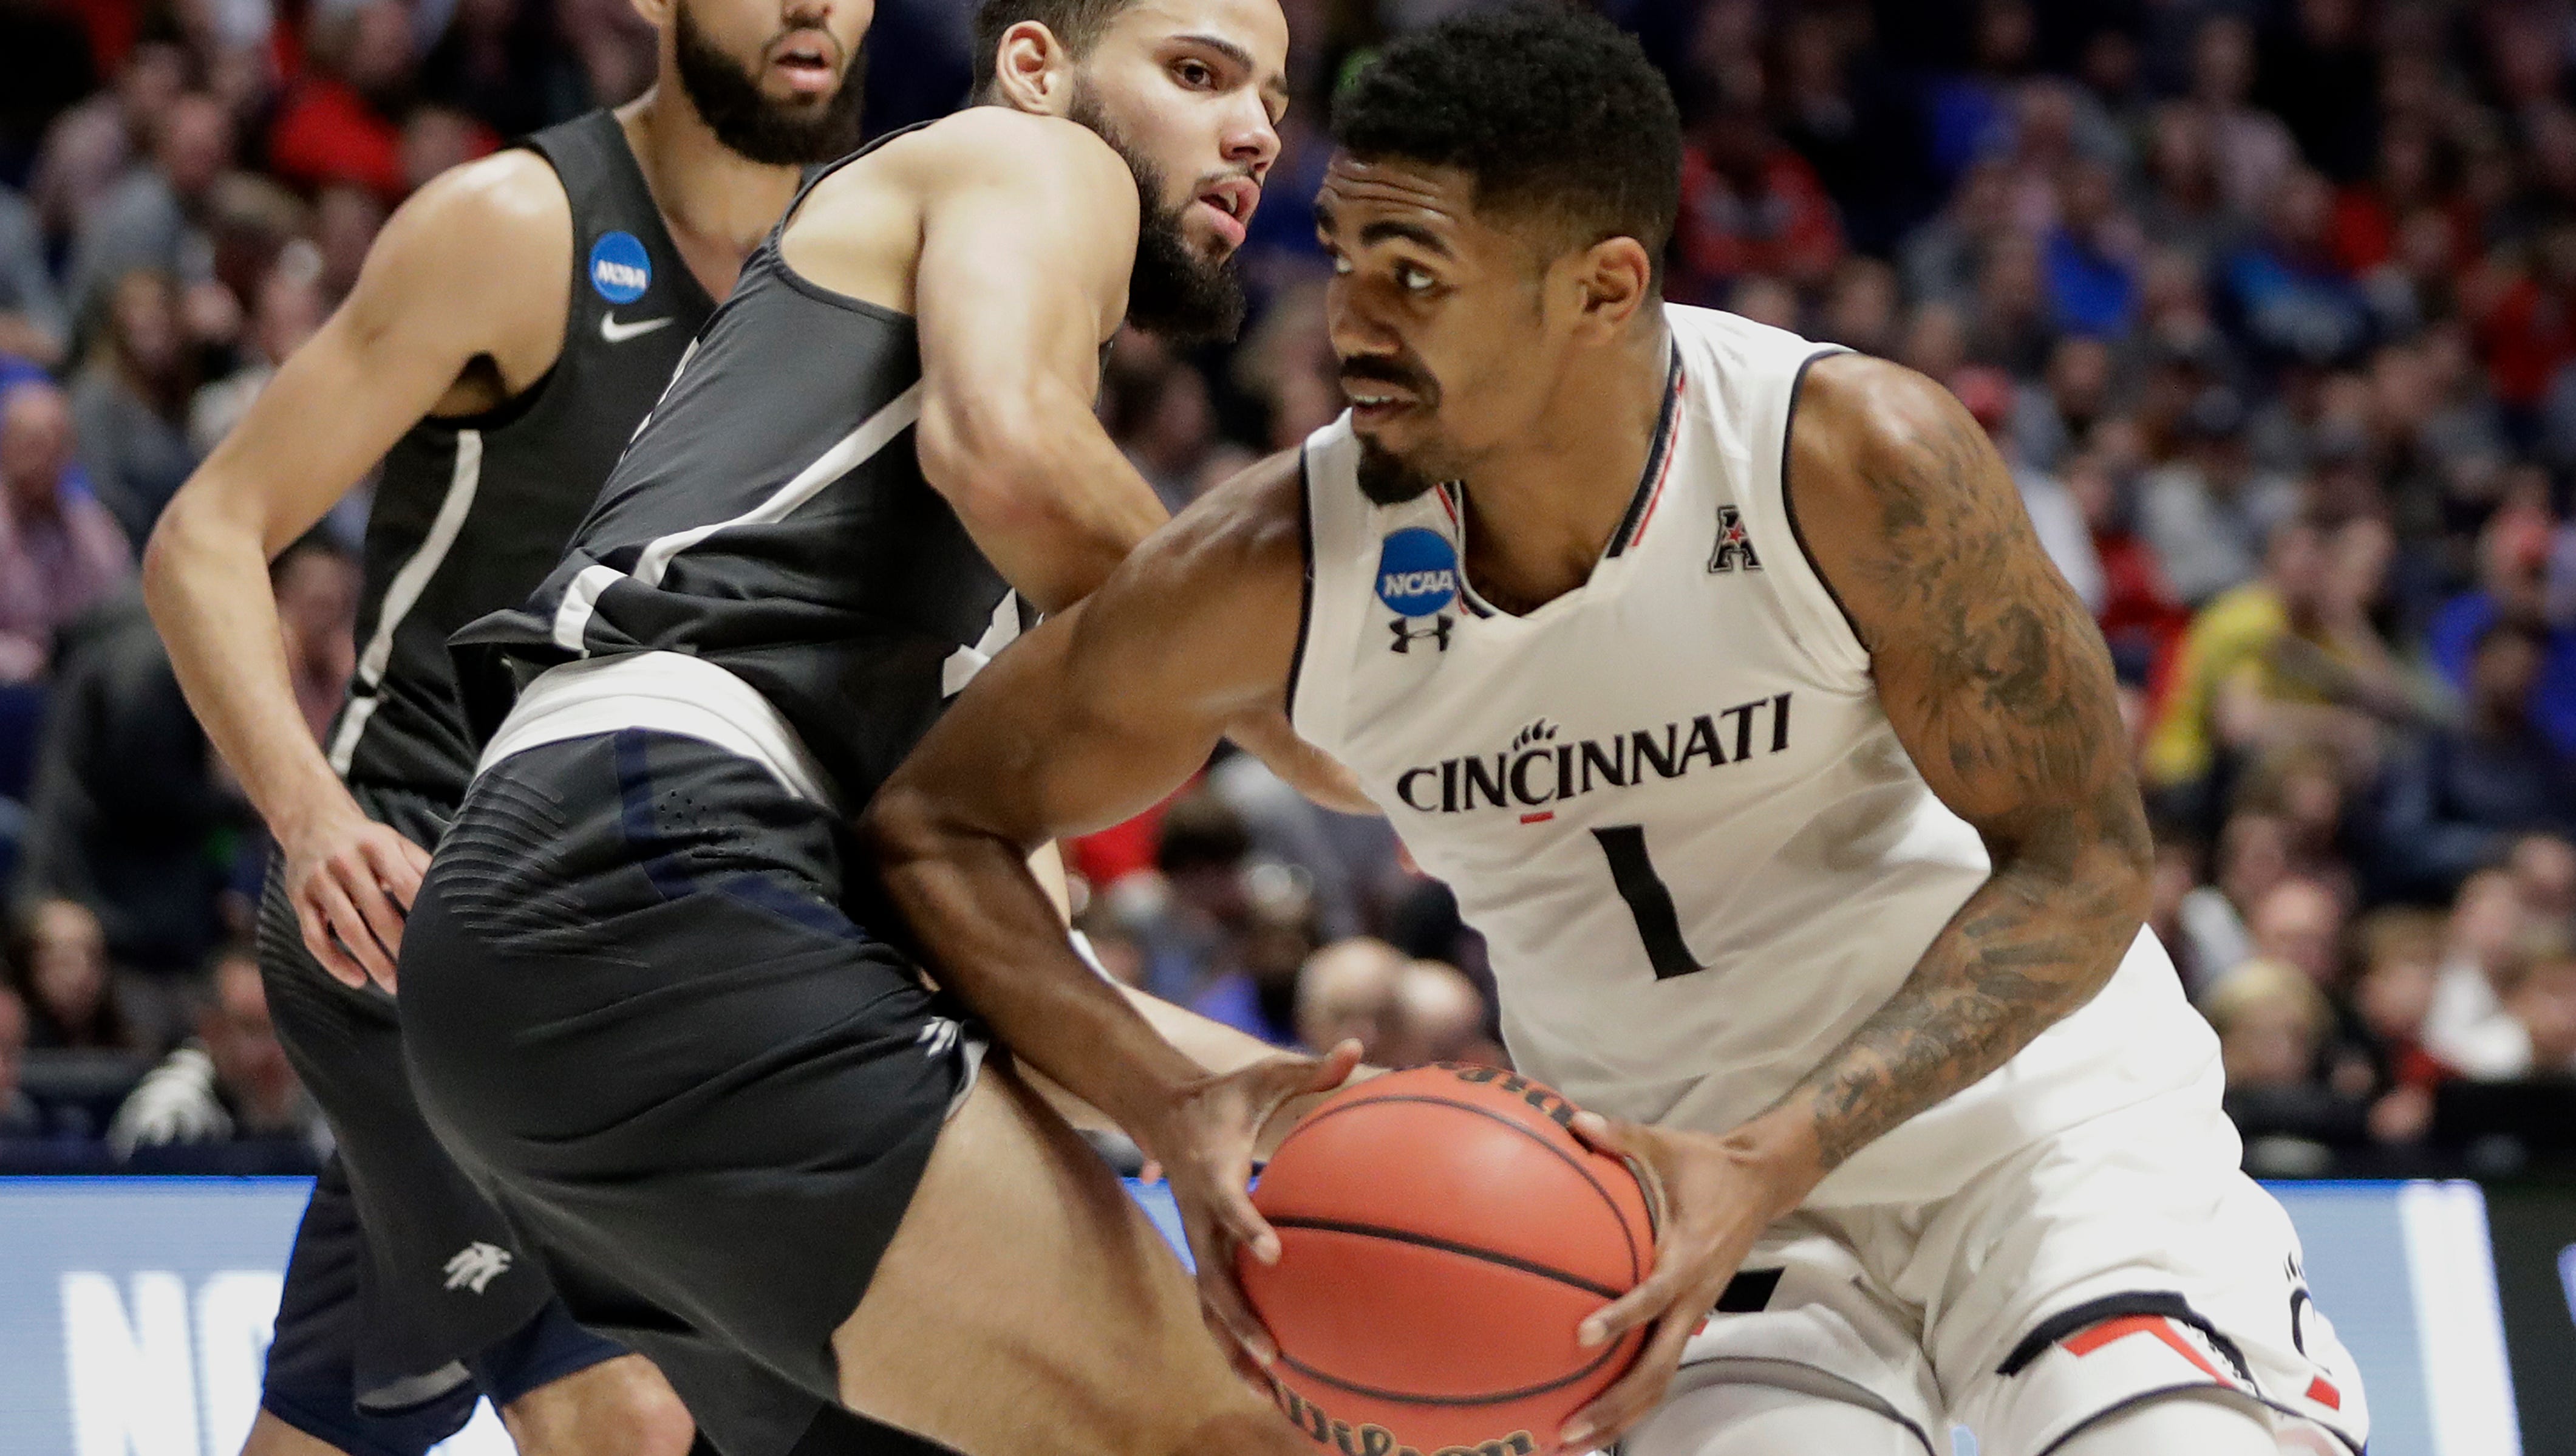 24. Portland Trail Blazers: Jacob Evans, Wing, Jr., Cincinnati. With a solid backcourt, the Blazers could use some depth at small forward — and Evans fits. He’s known for his defense, but he also shot 38 percent on 3-pointers. At 6-6, he can go with the run-and-gun Blazers offense, while adding that defensive element that could make them formidable in the West.